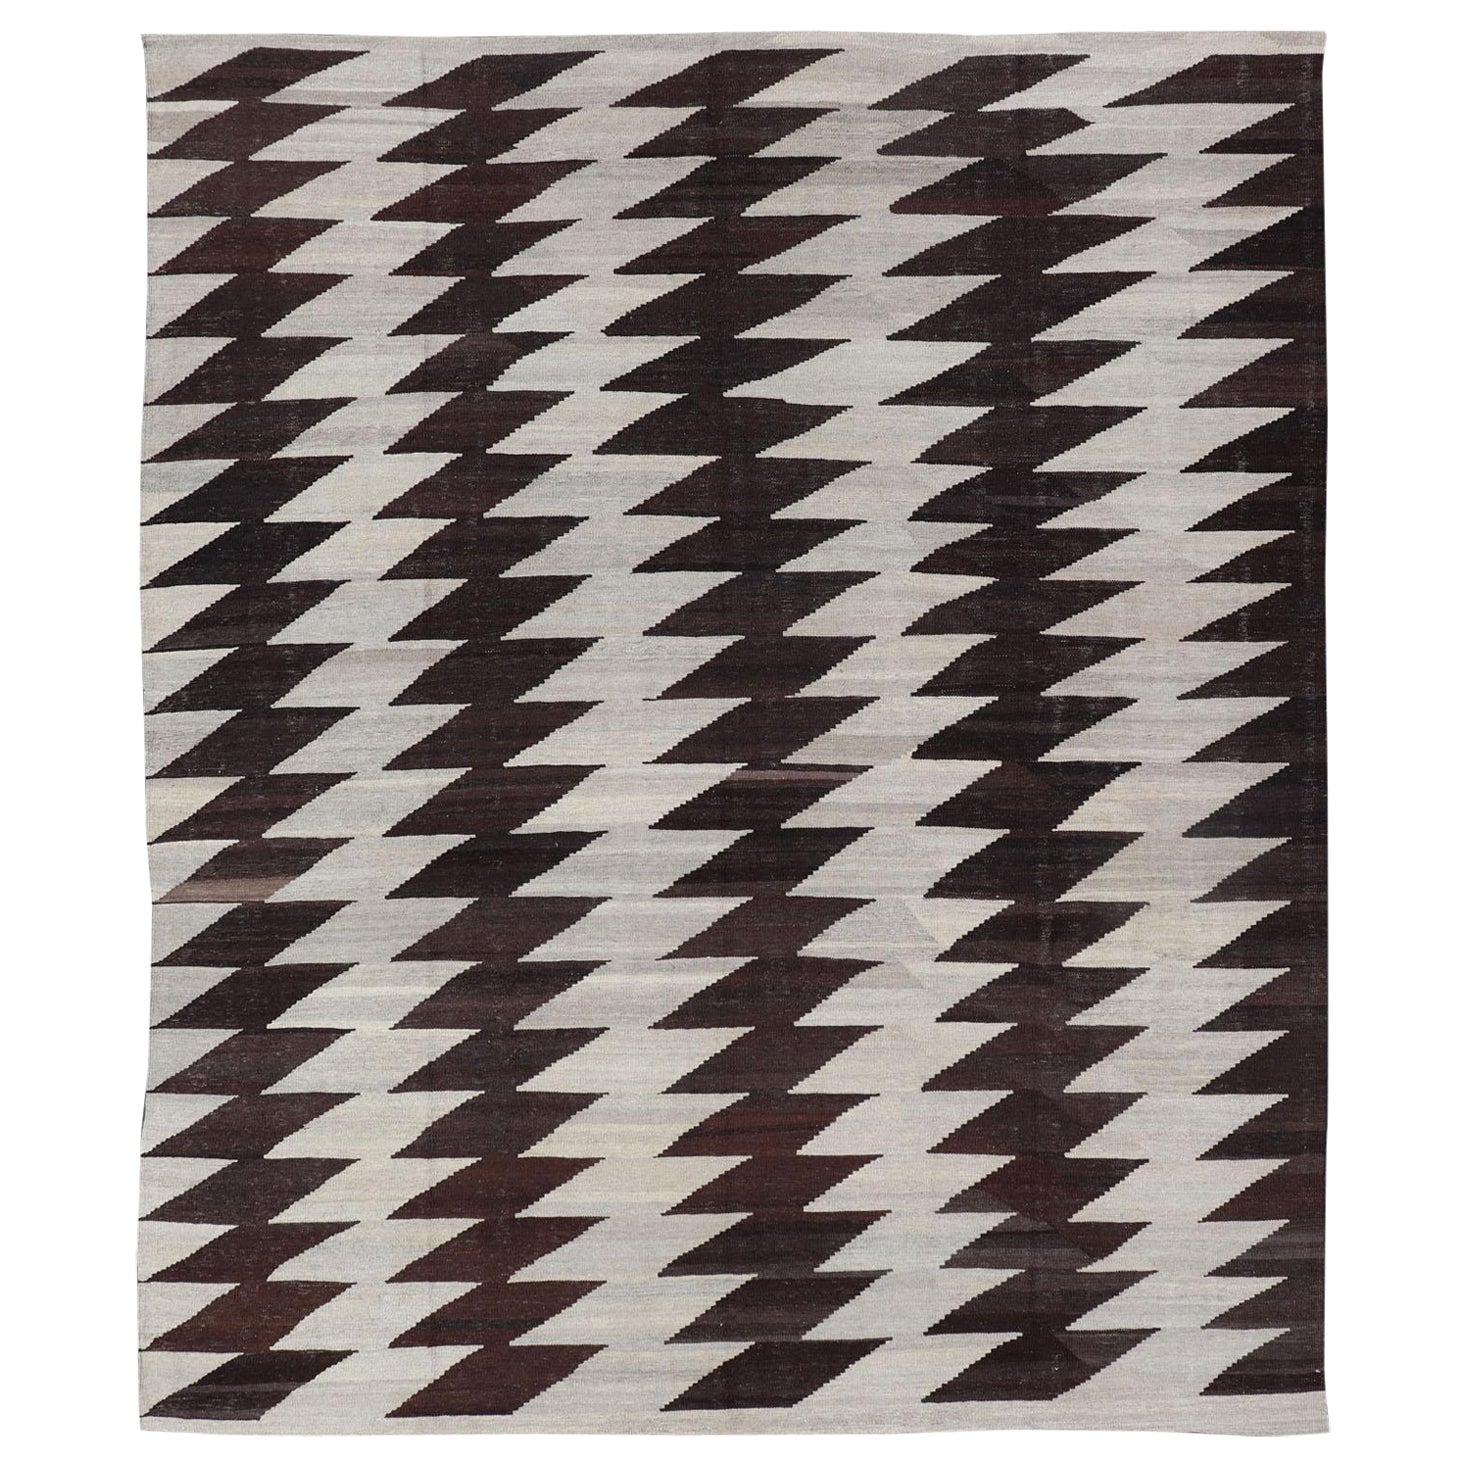 Afghanistan Kilim with Modern Design With Browns and Gray